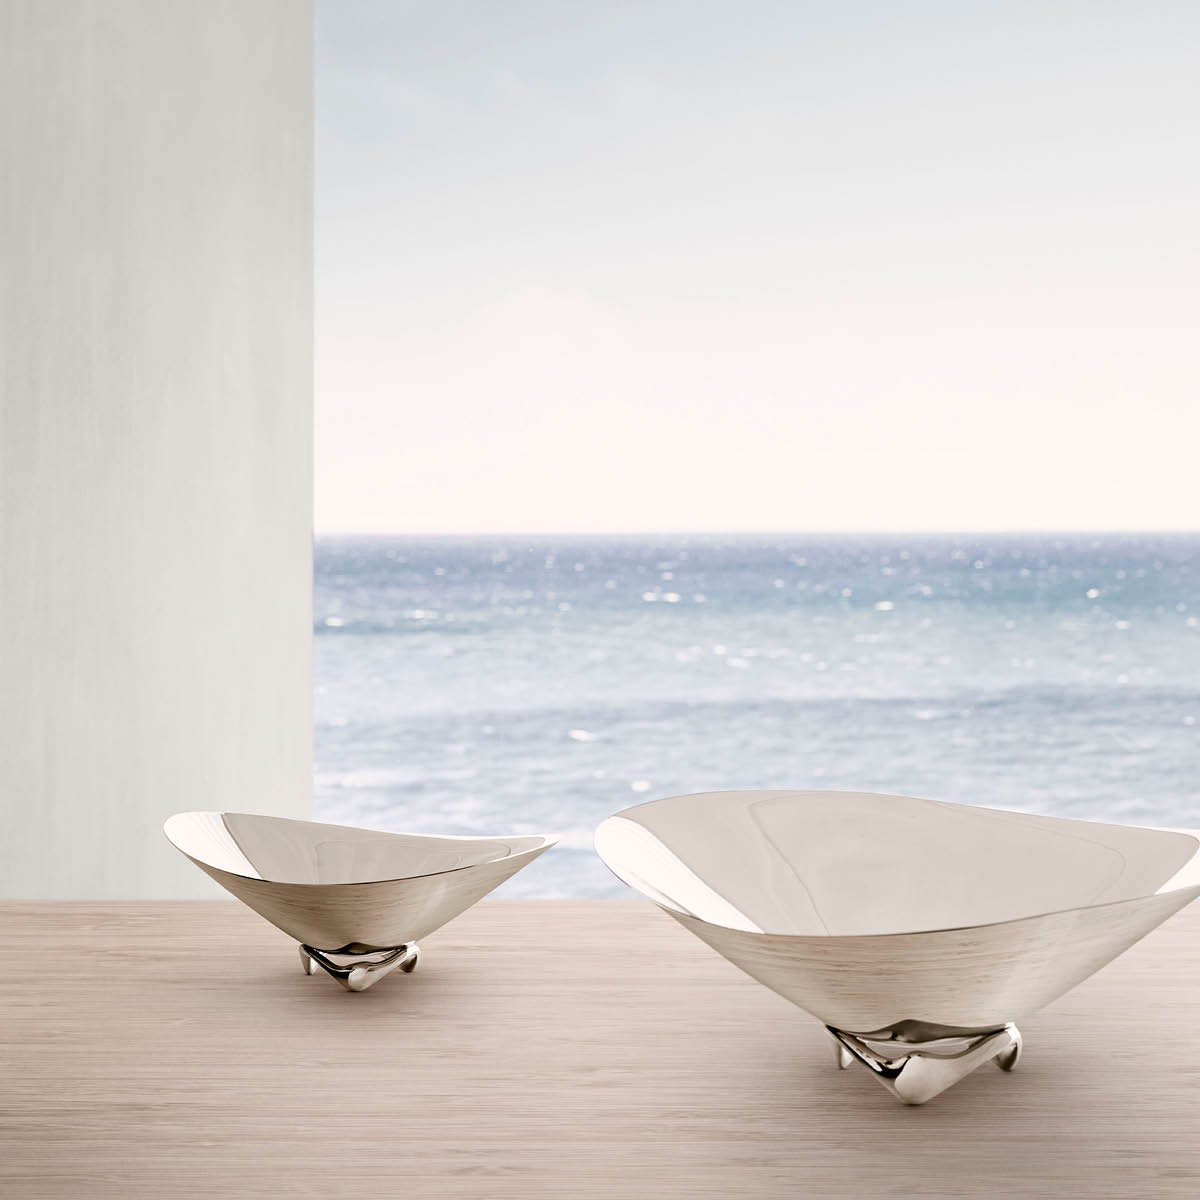 Henning Koppel wave bowls in mirror-polished stainless steel 